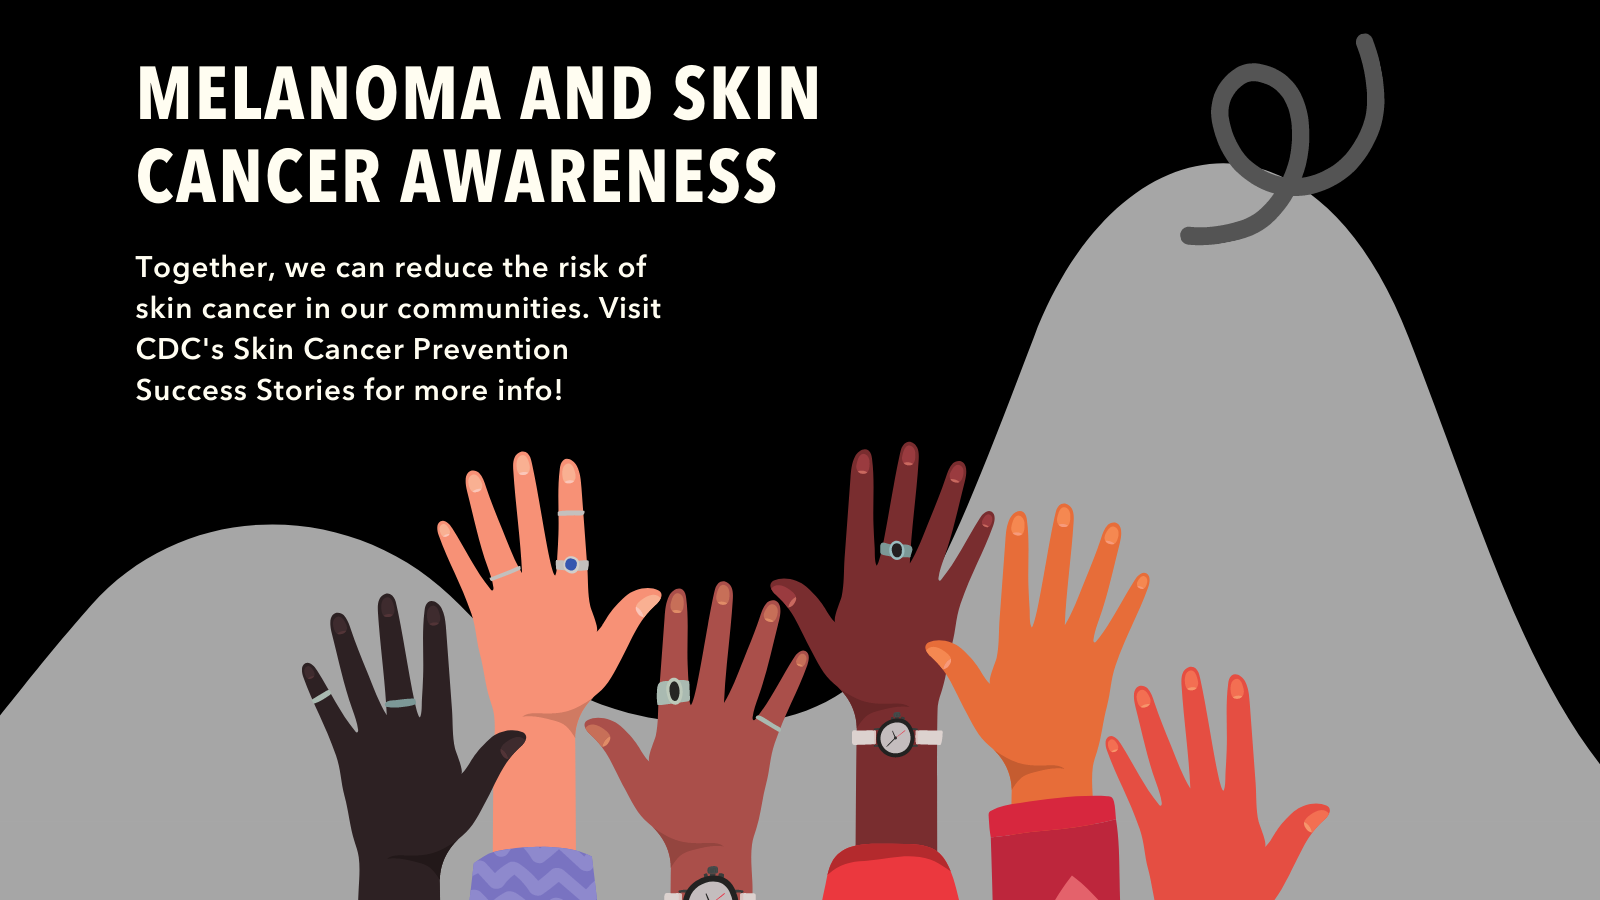 Image of different colored hands reaching up on gray hill background and black cancer ribbon. Text reads : Melanoma and Skin Cancer Awareness. Together we can reduce the risk of skin cancer in our communities. Visit CDC's Skin Cancer Prevention Success Stories for more info!